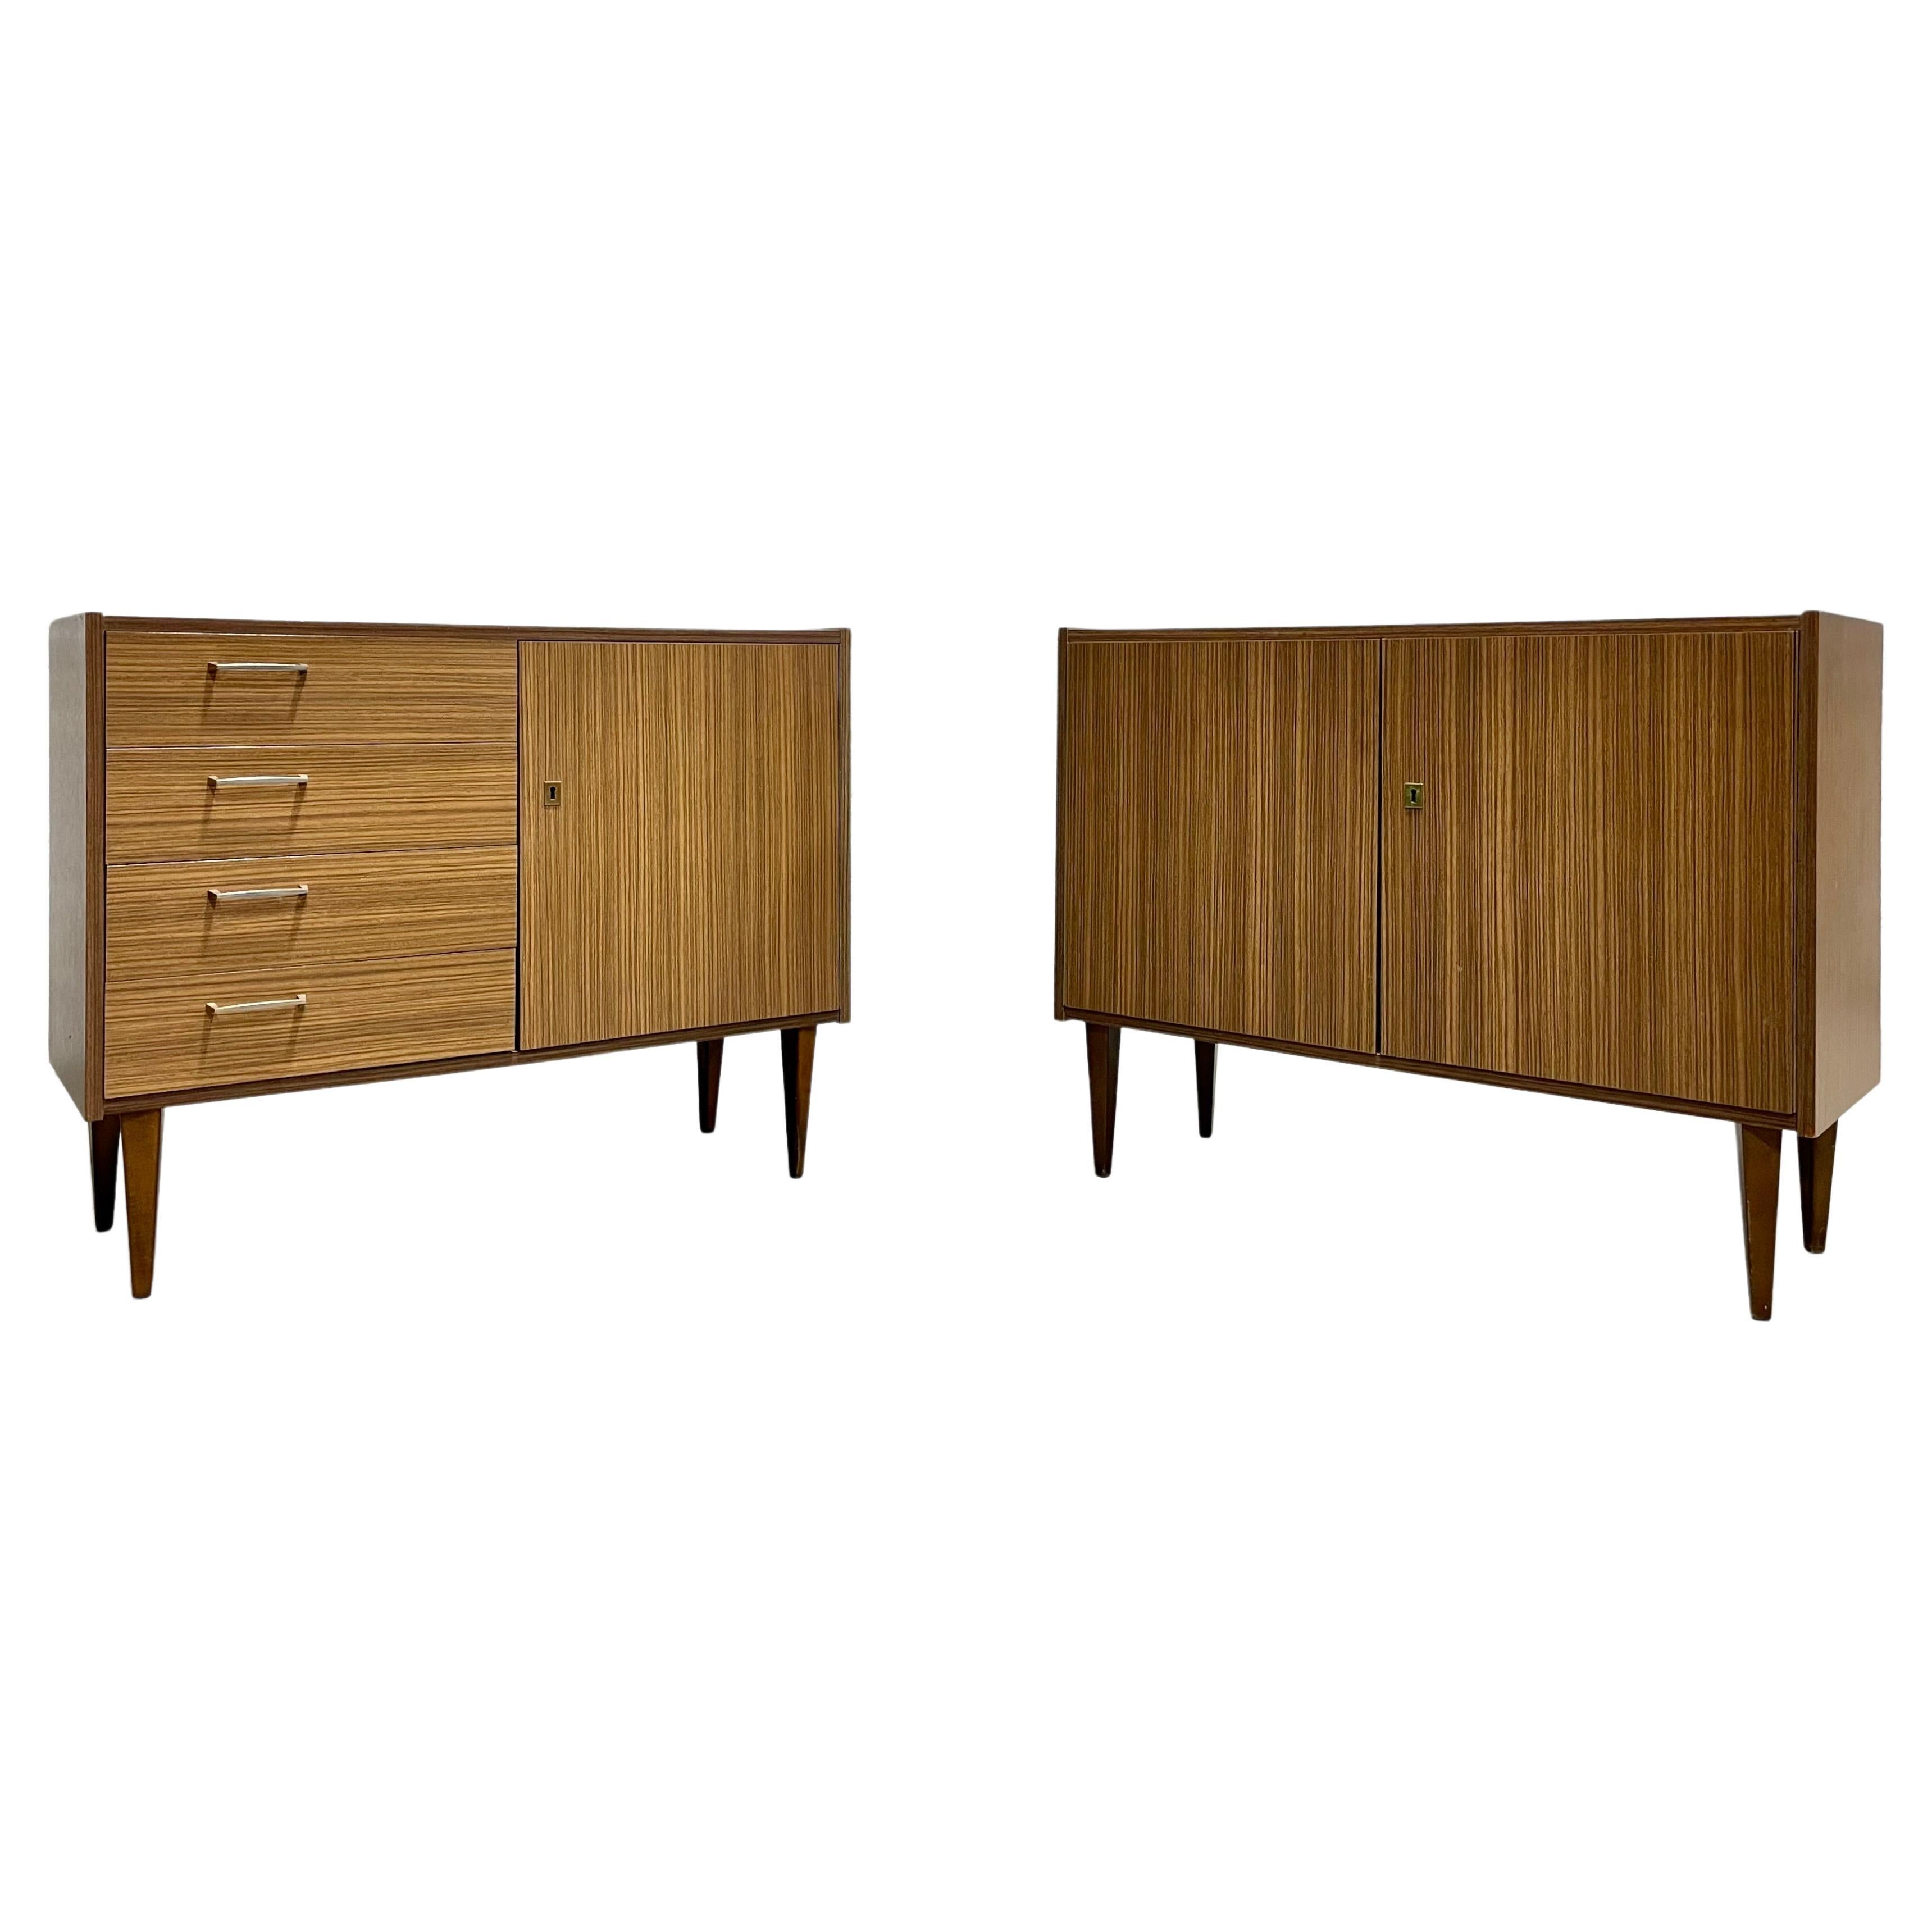 Pair of Mid-Century Modern Laminate Credenzas/ Cabinets, Made in Germany For Sale